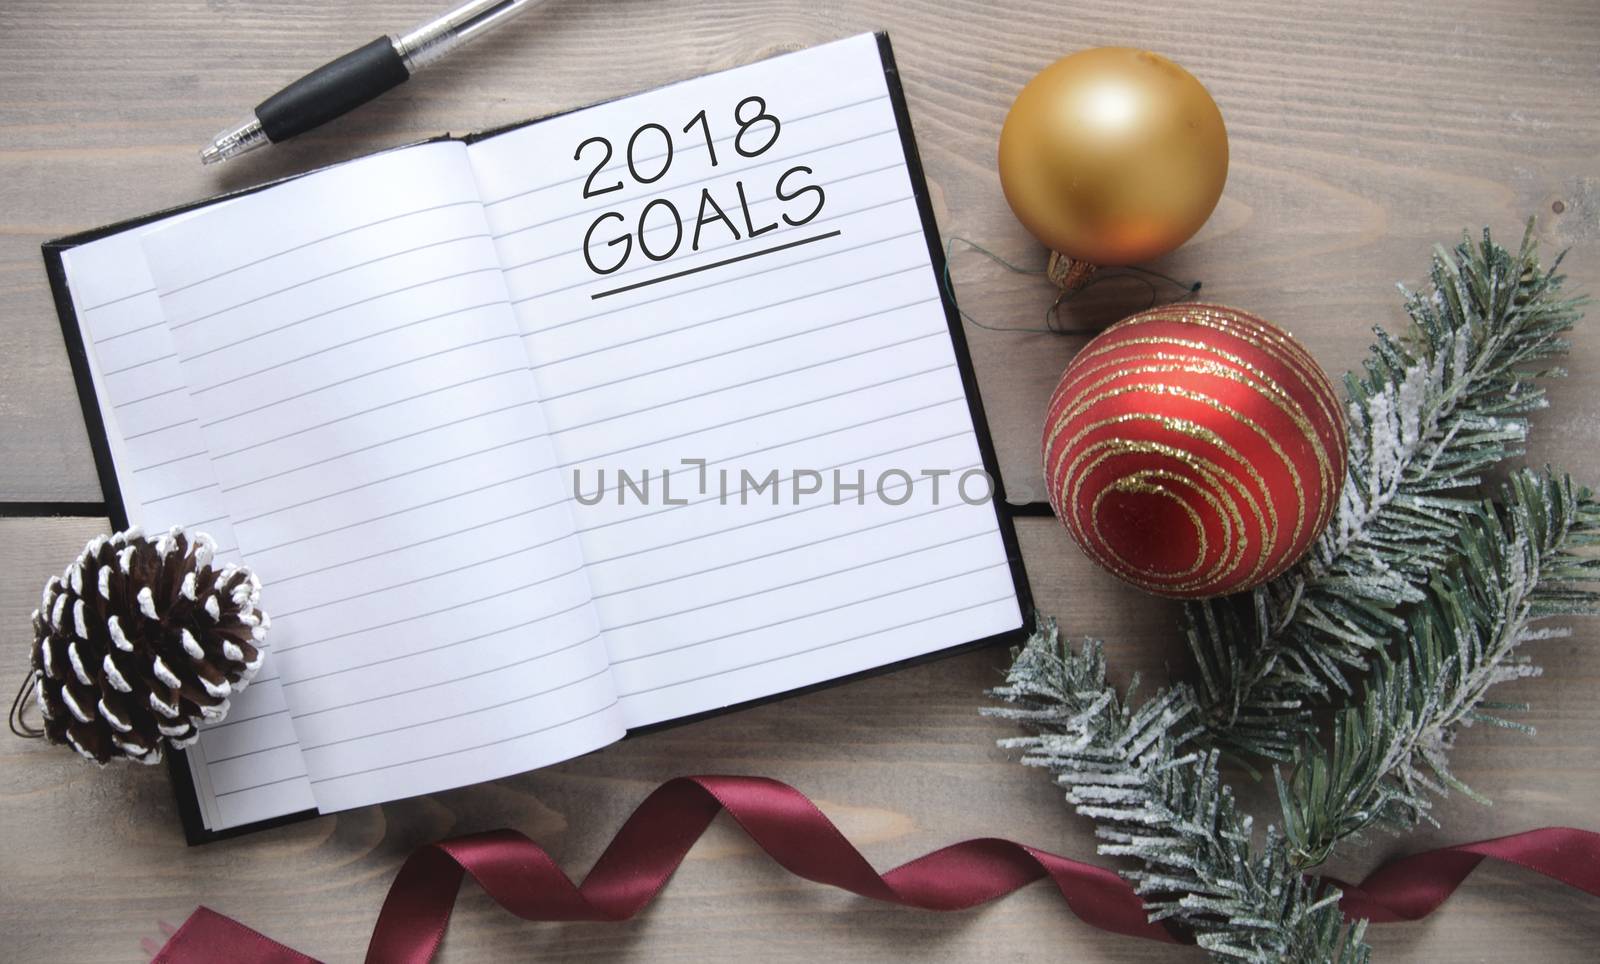 Xmas decorations around a notepad with 2018 goals list 